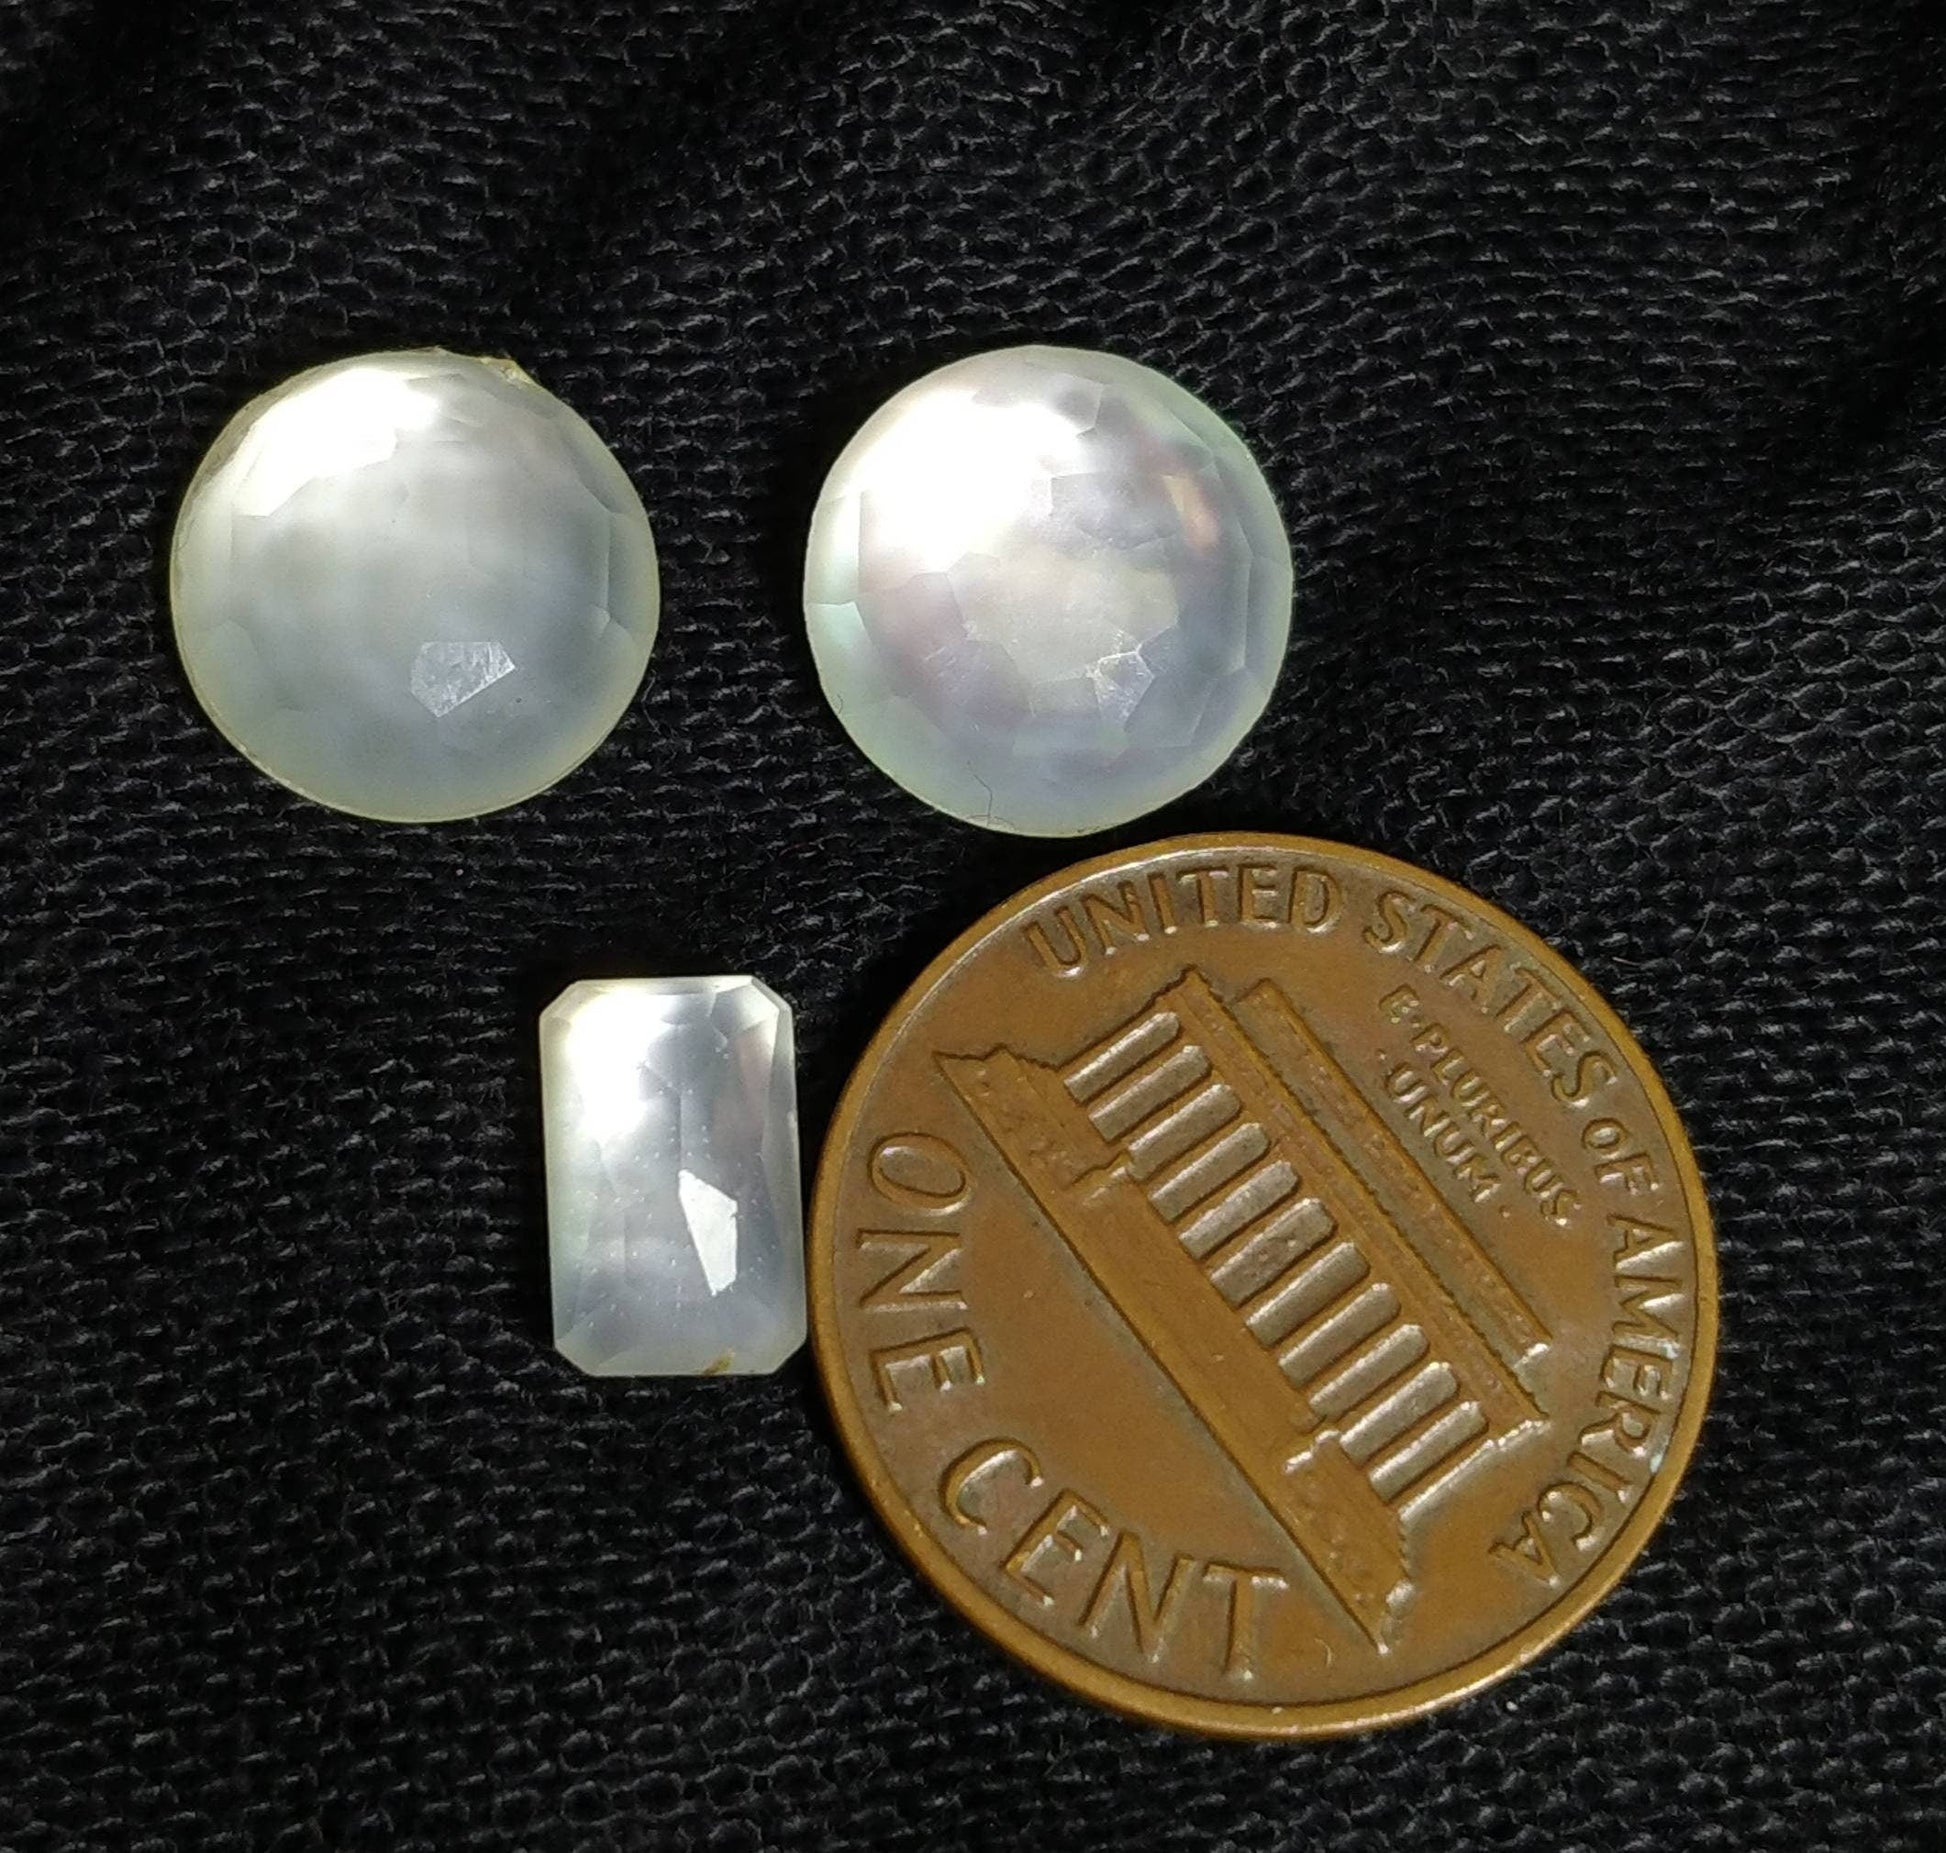 ARSAA GEMS AND MINERALSNatural top quality beautiful 10 carats small set of rose cut Faceted quartz with mother of pearl doublets Cabochons - Premium  from ARSAA GEMS AND MINERALS - Just $15.00! Shop now at ARSAA GEMS AND MINERALS